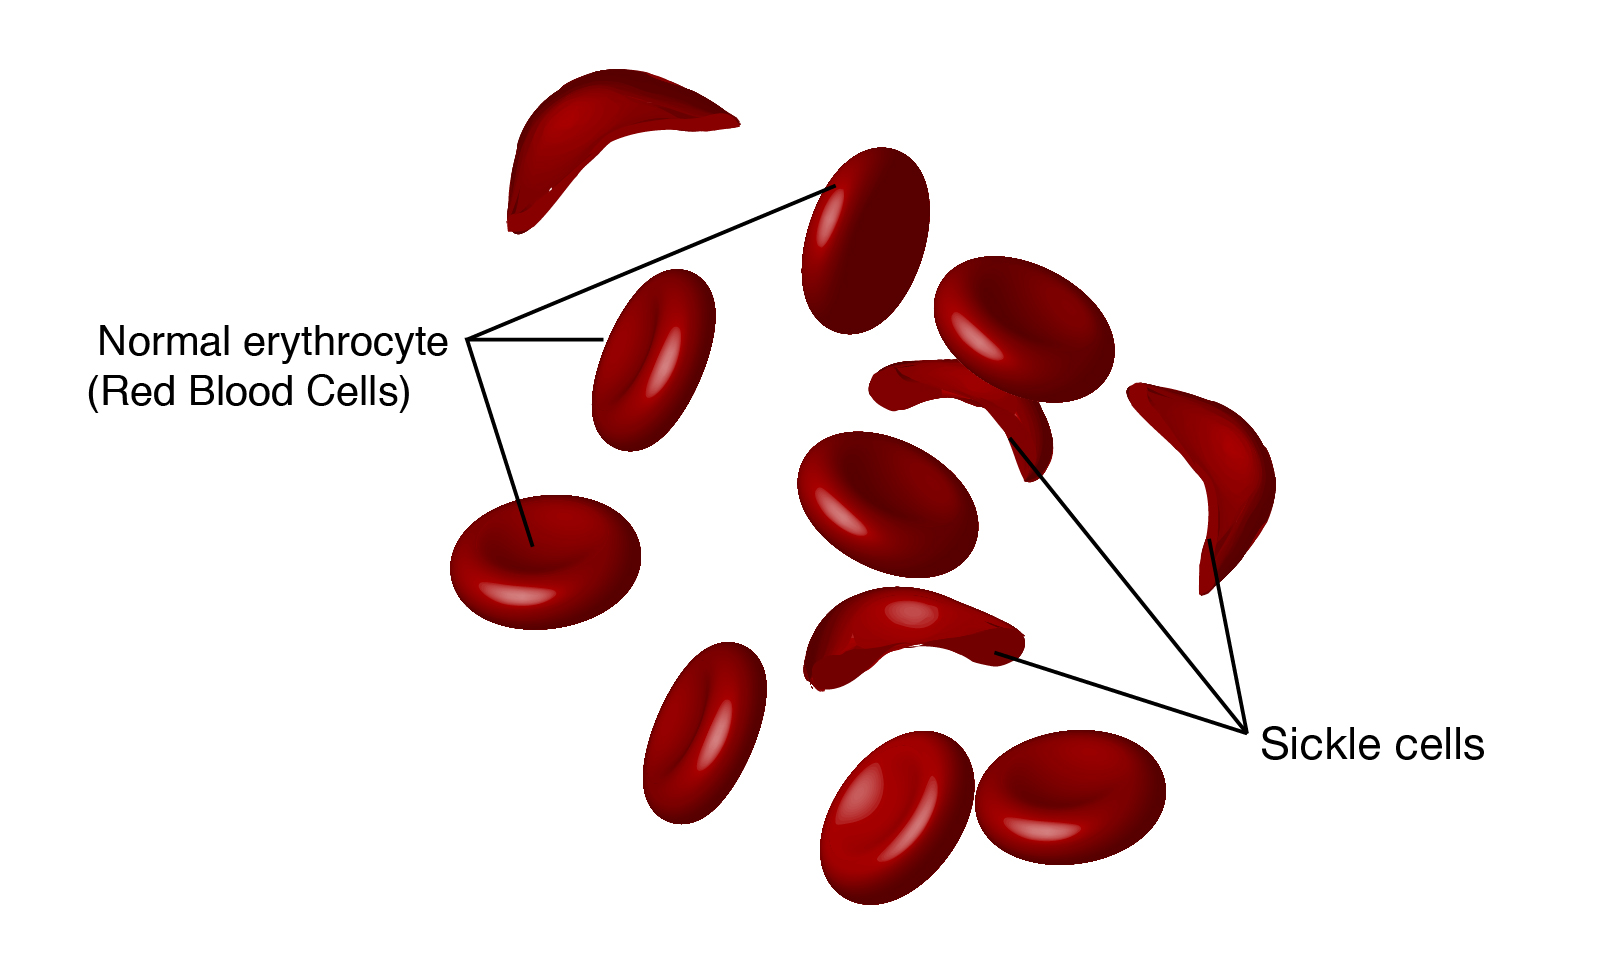 sickle cell anemia inheritance